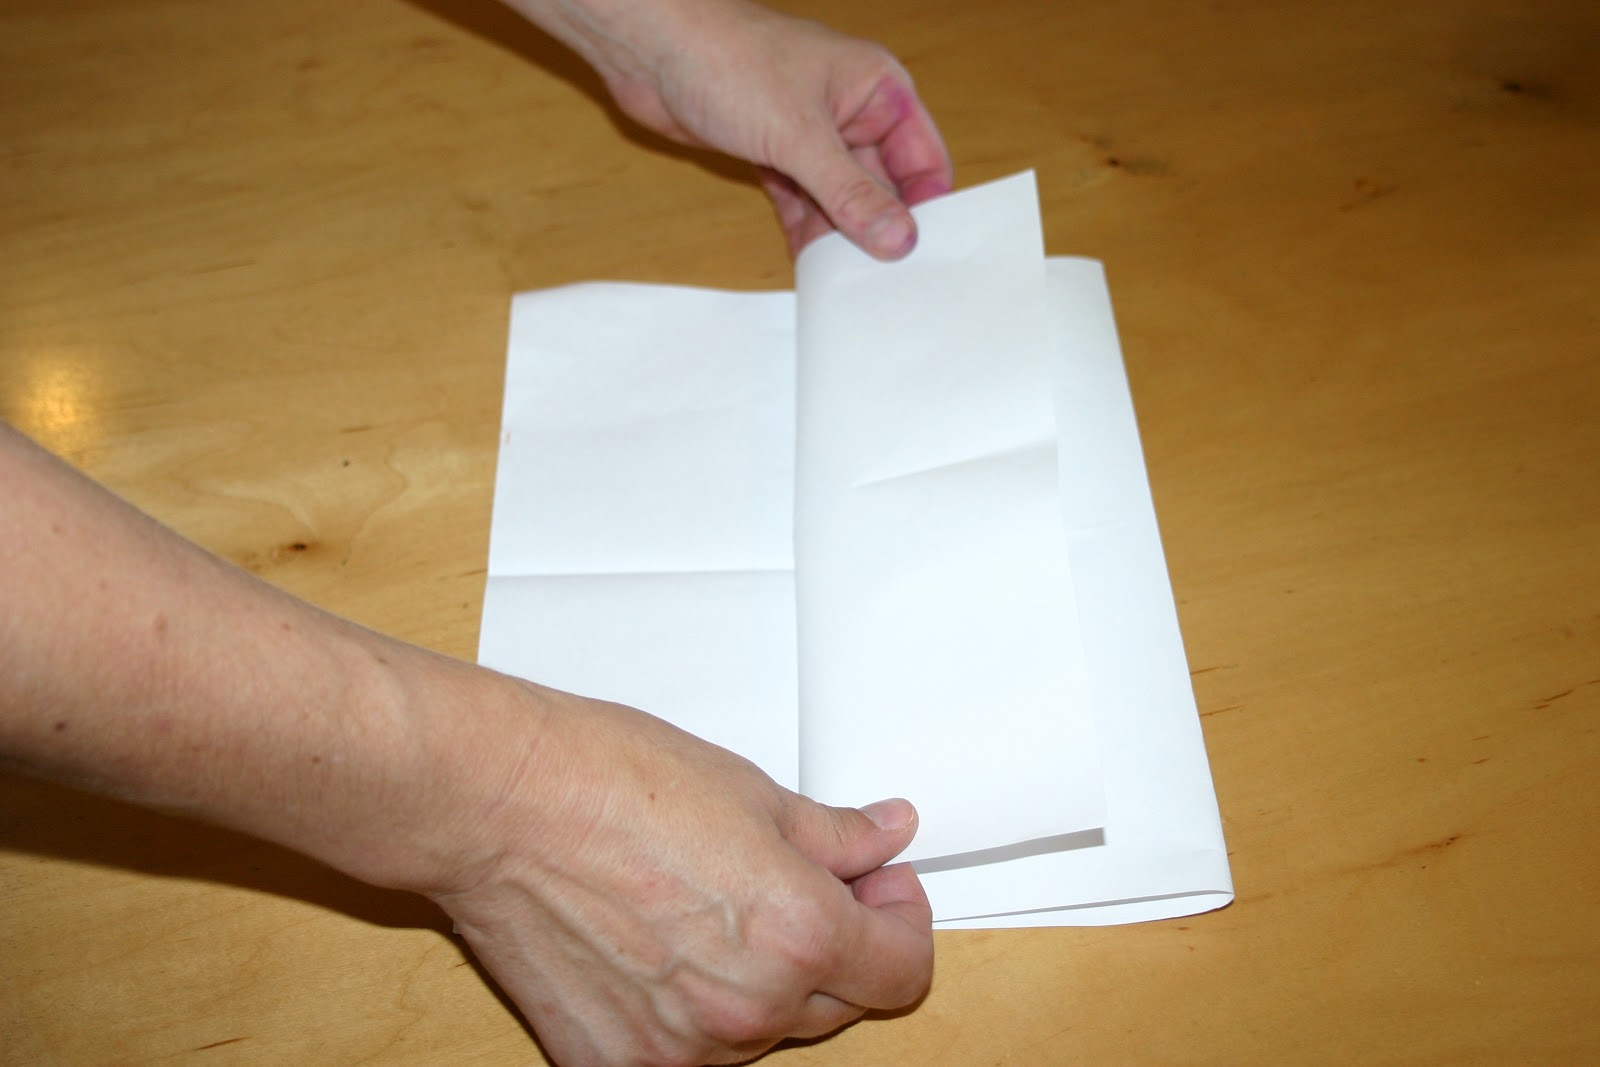 Turn the paperover and do the same thing again, folding the other side ...